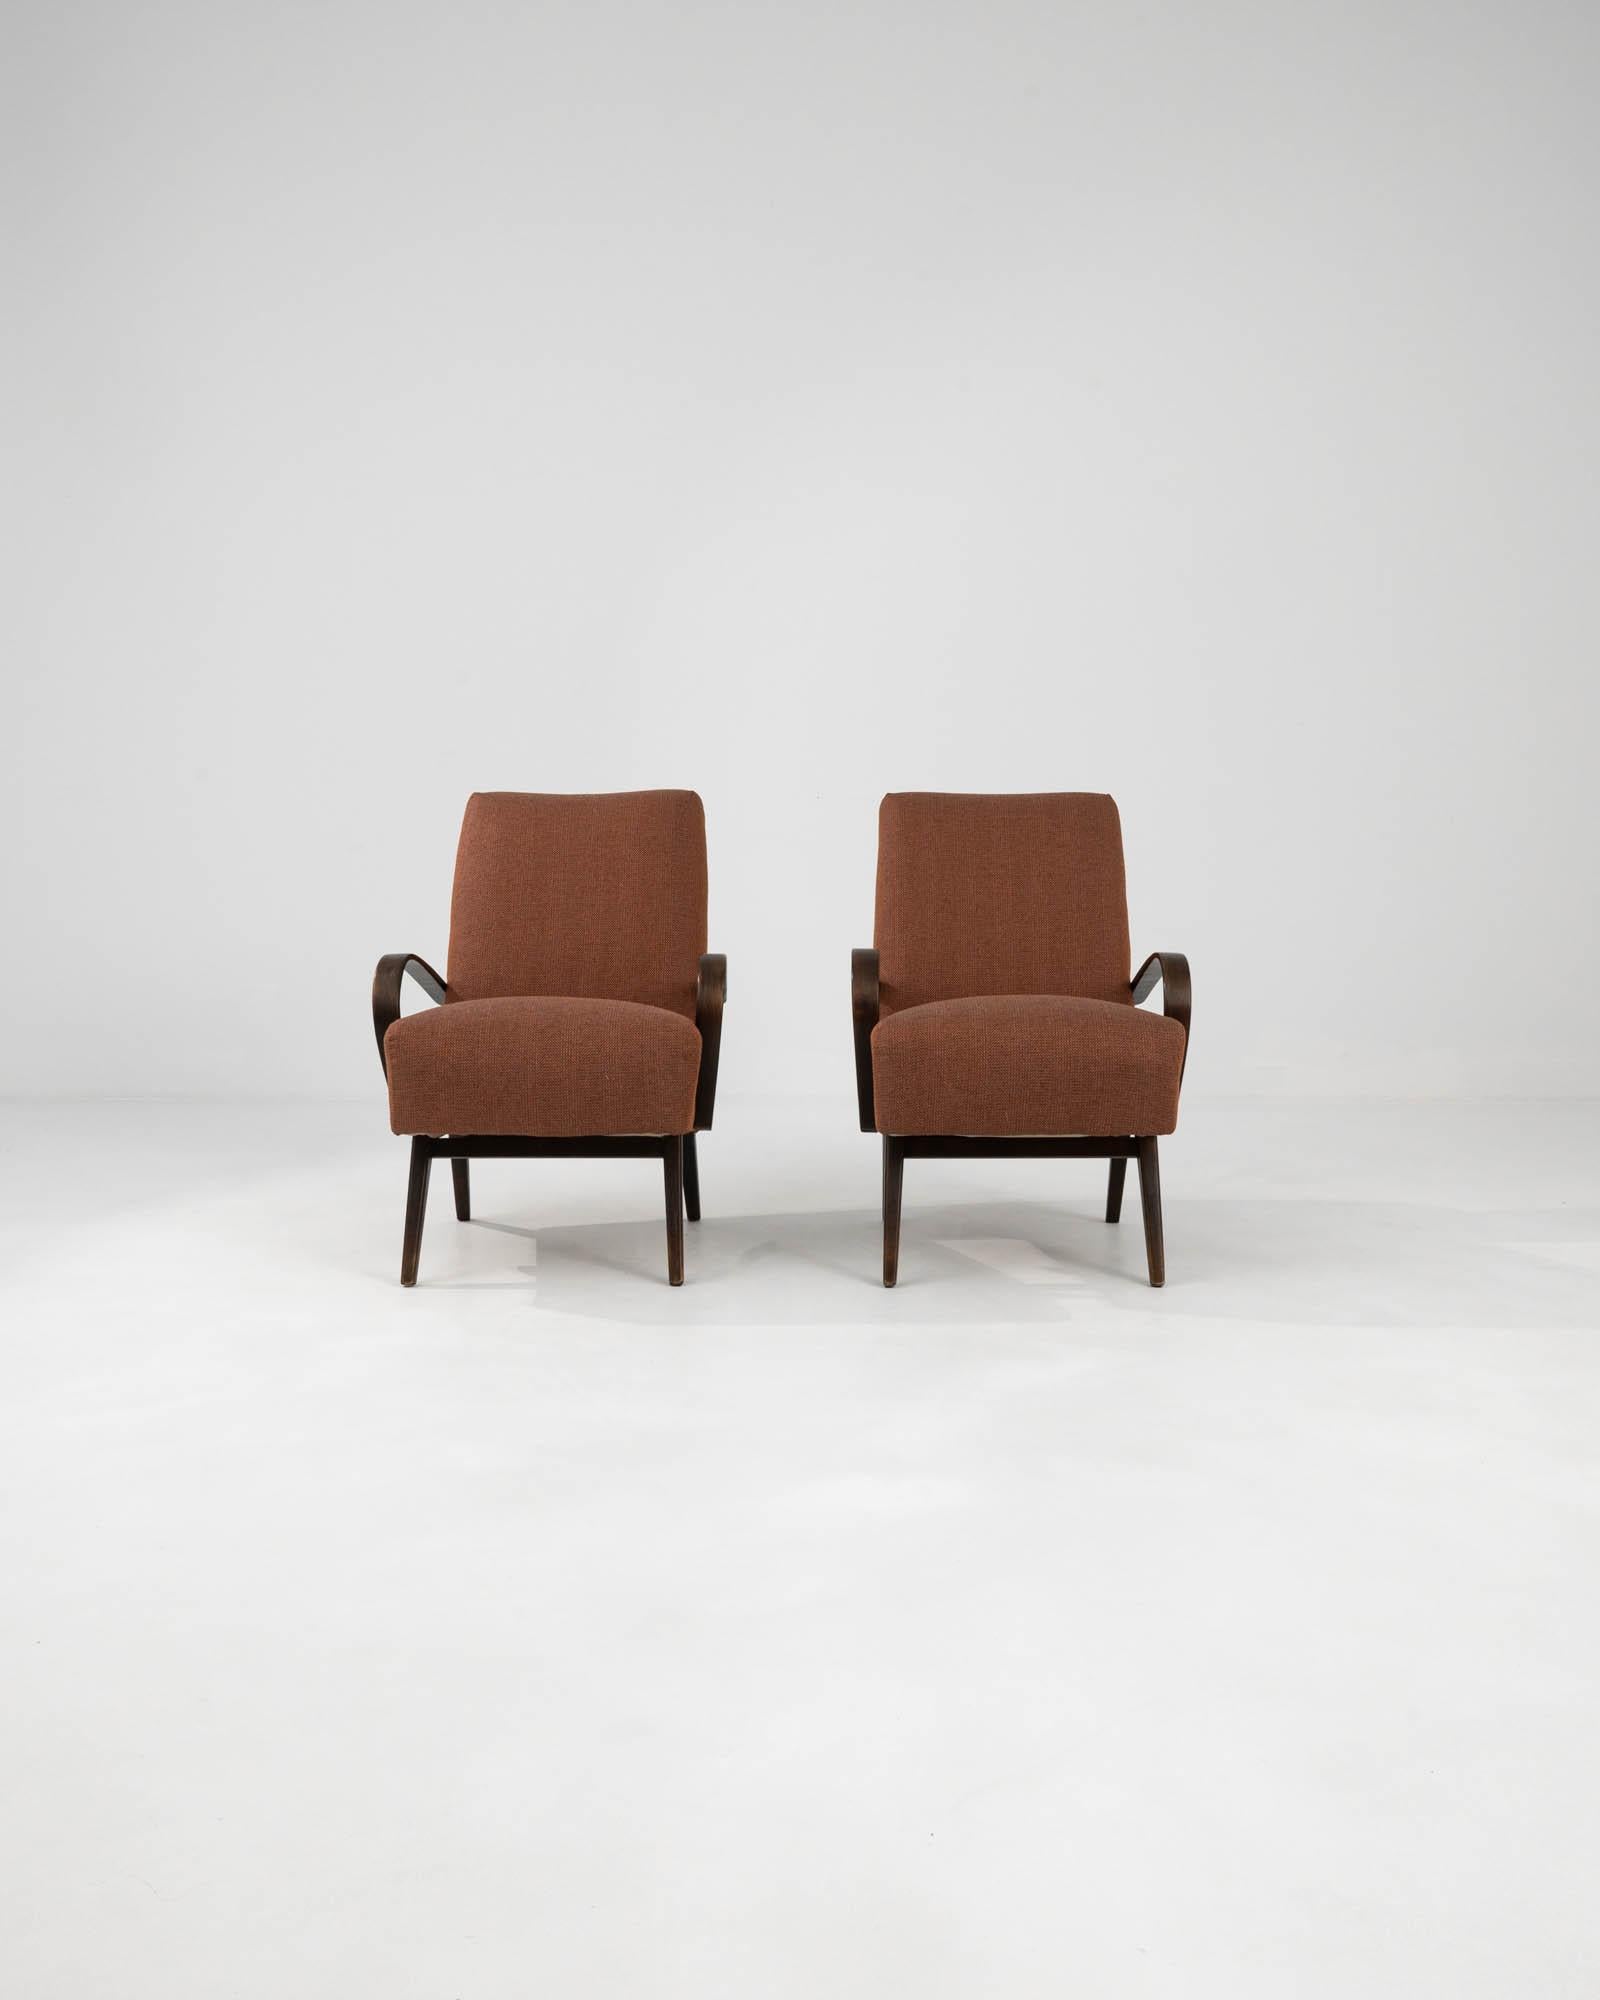 Upholstery 1960s Czech Upholstered Armchairs By J. Halabala, a Pair For Sale